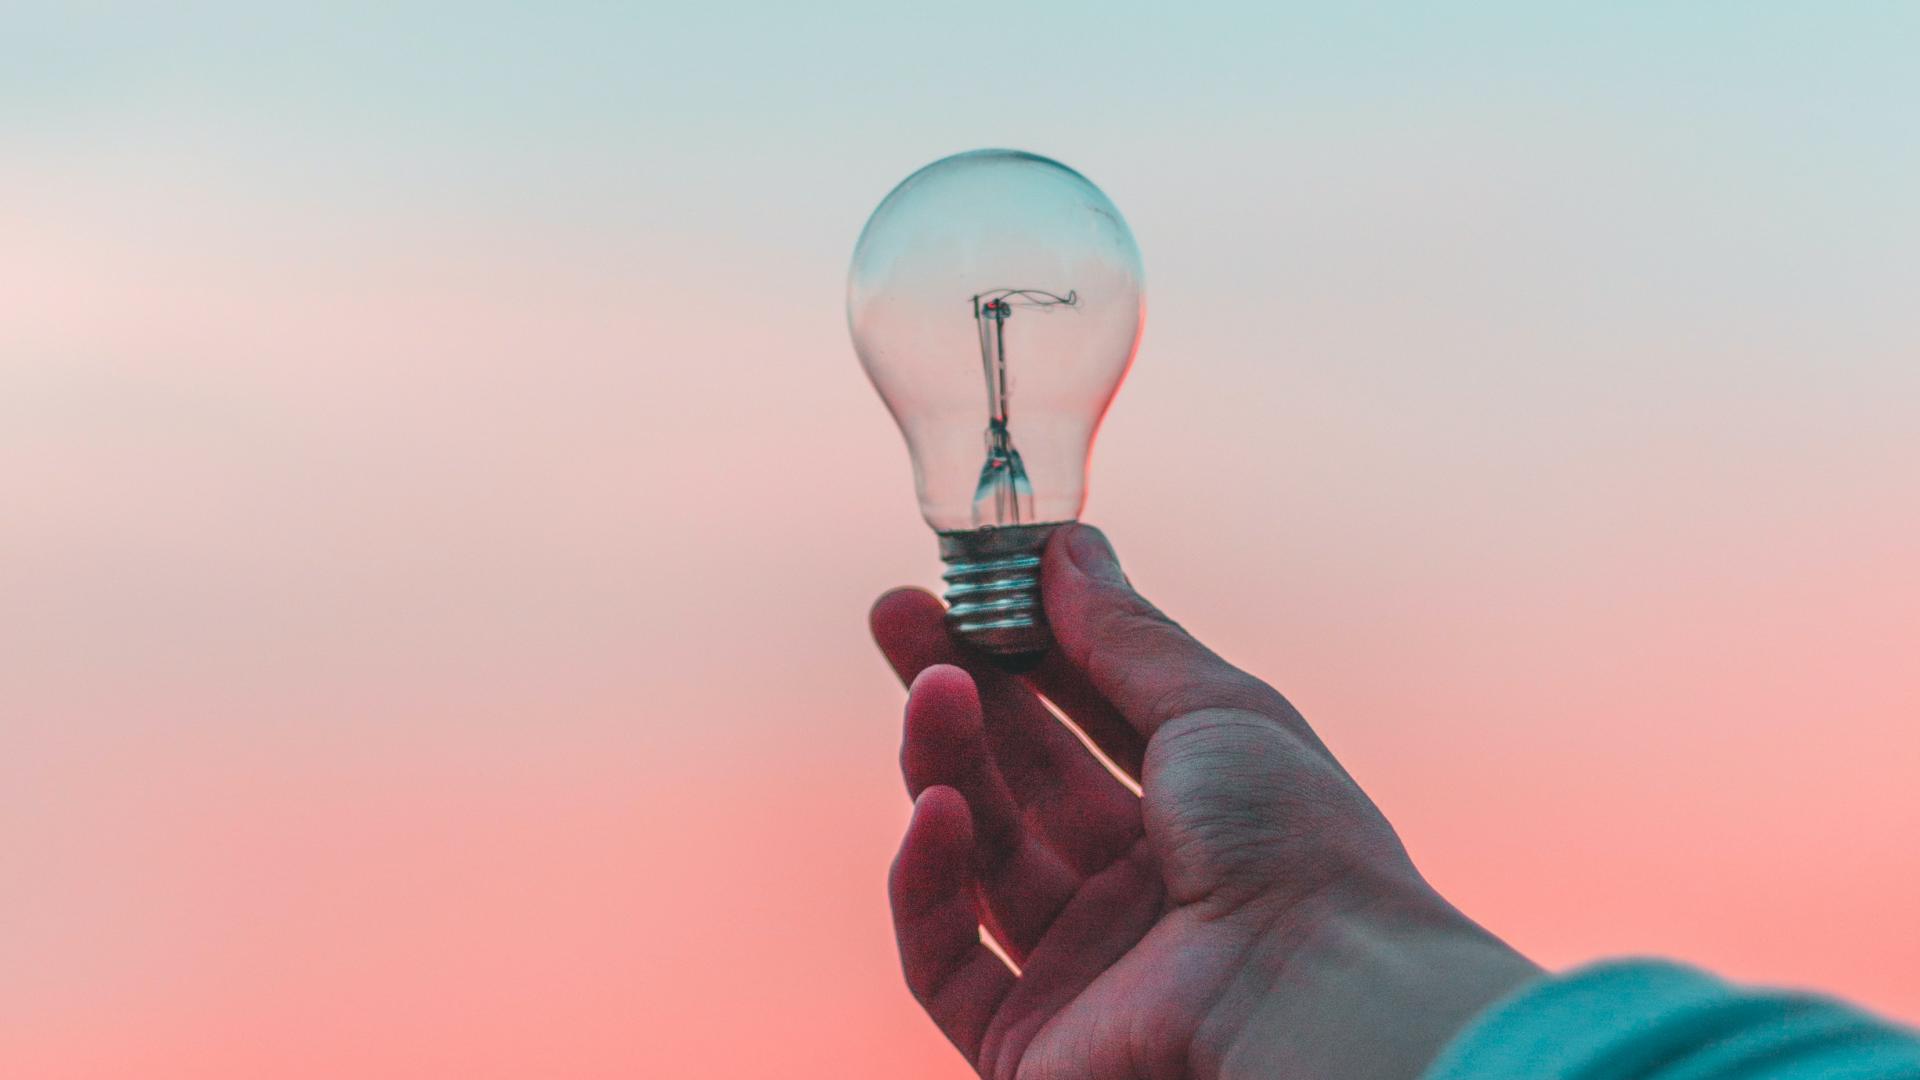 A lightbulb in someone's hand against a blue and pink sky